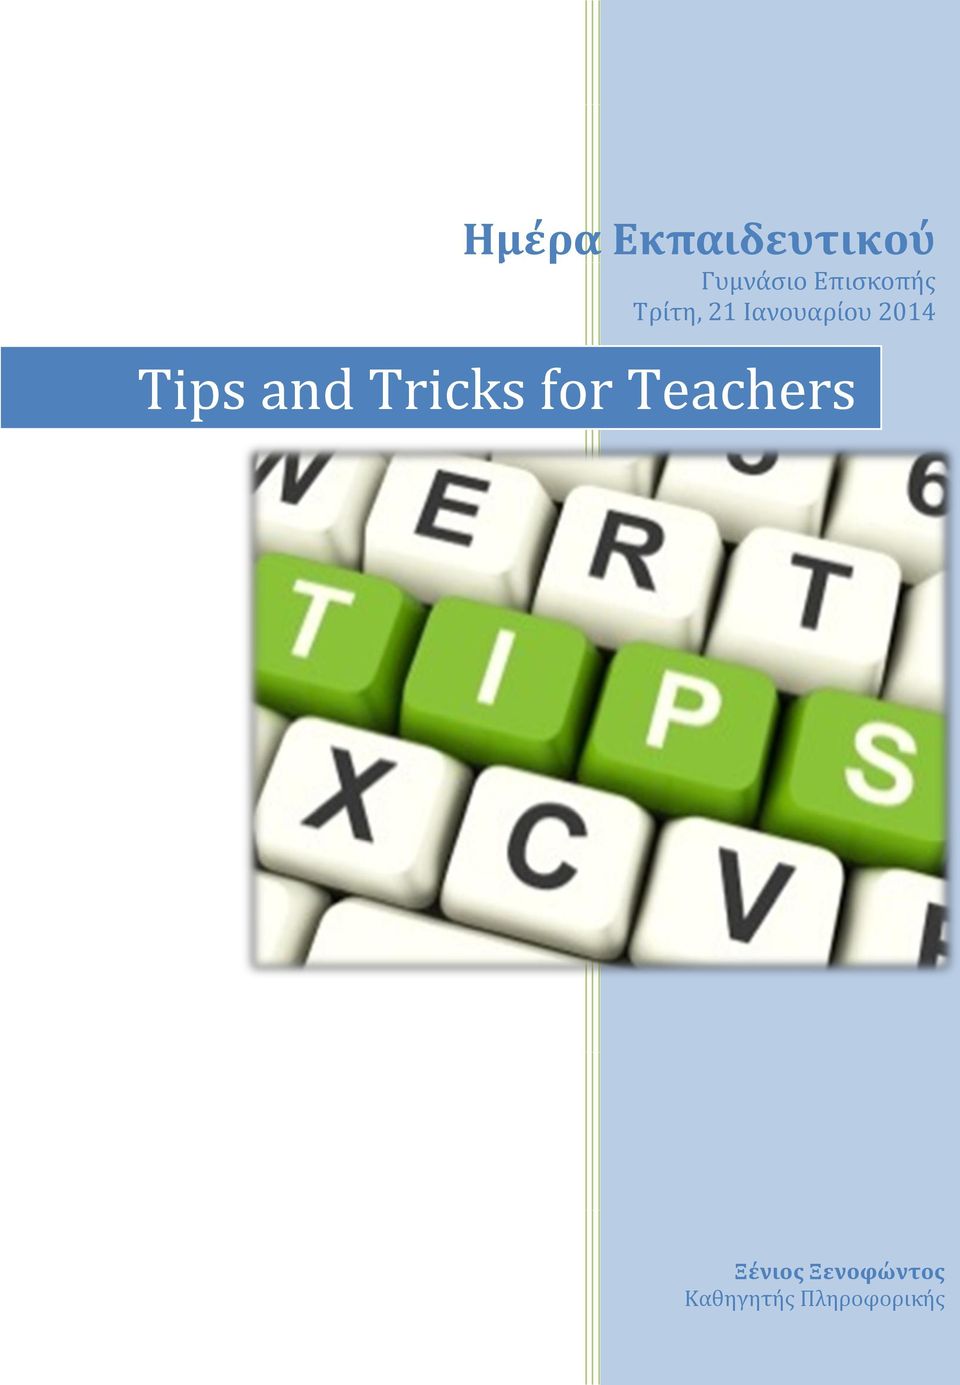 2014 Tips and Tricks for Teachers